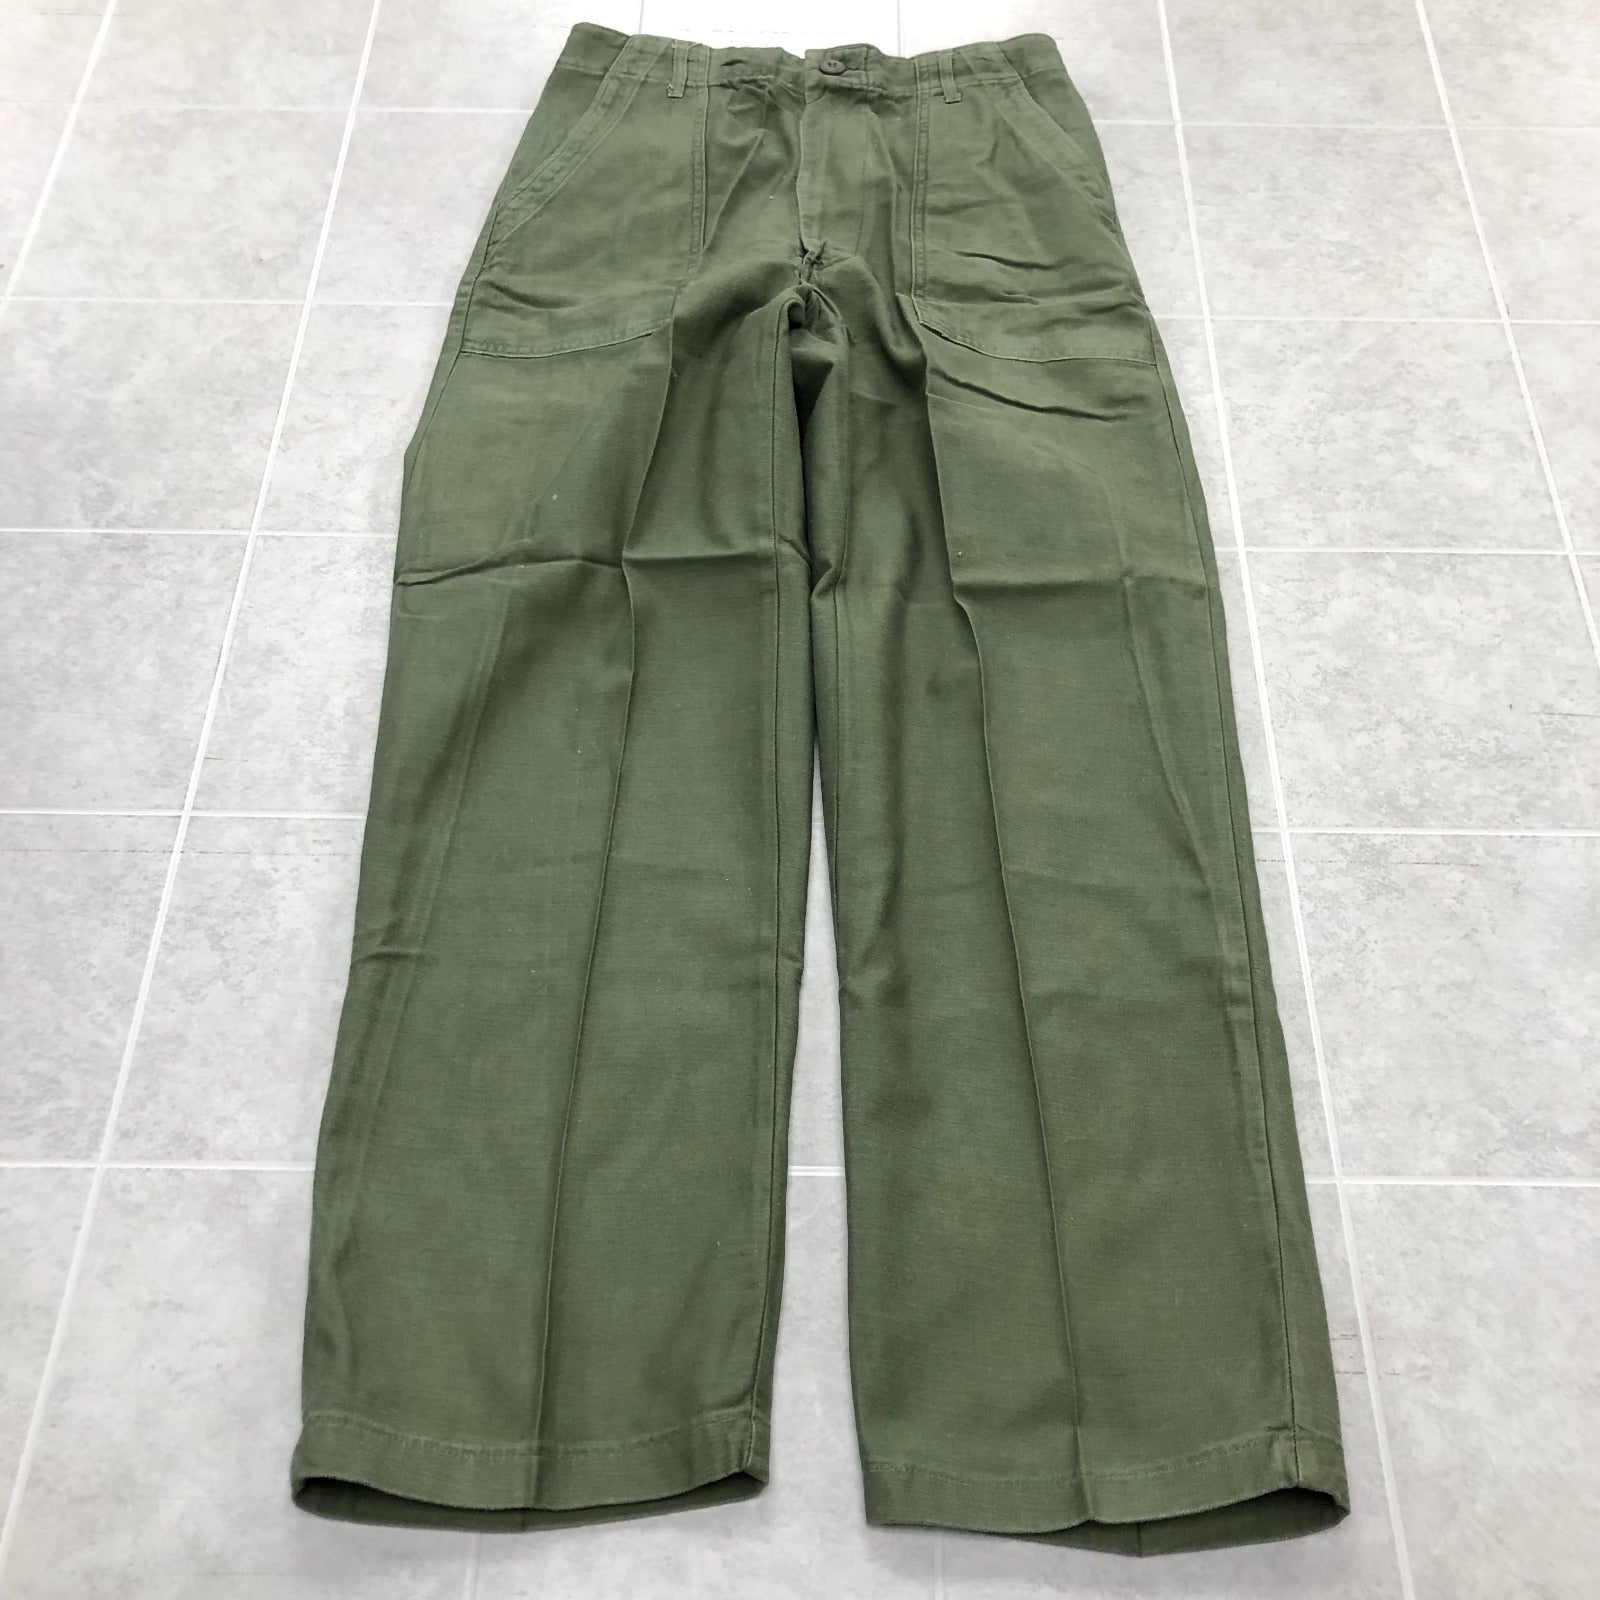 Vintage US Military Green Straight legged High-Rise Pants Adult Size 32 x 31